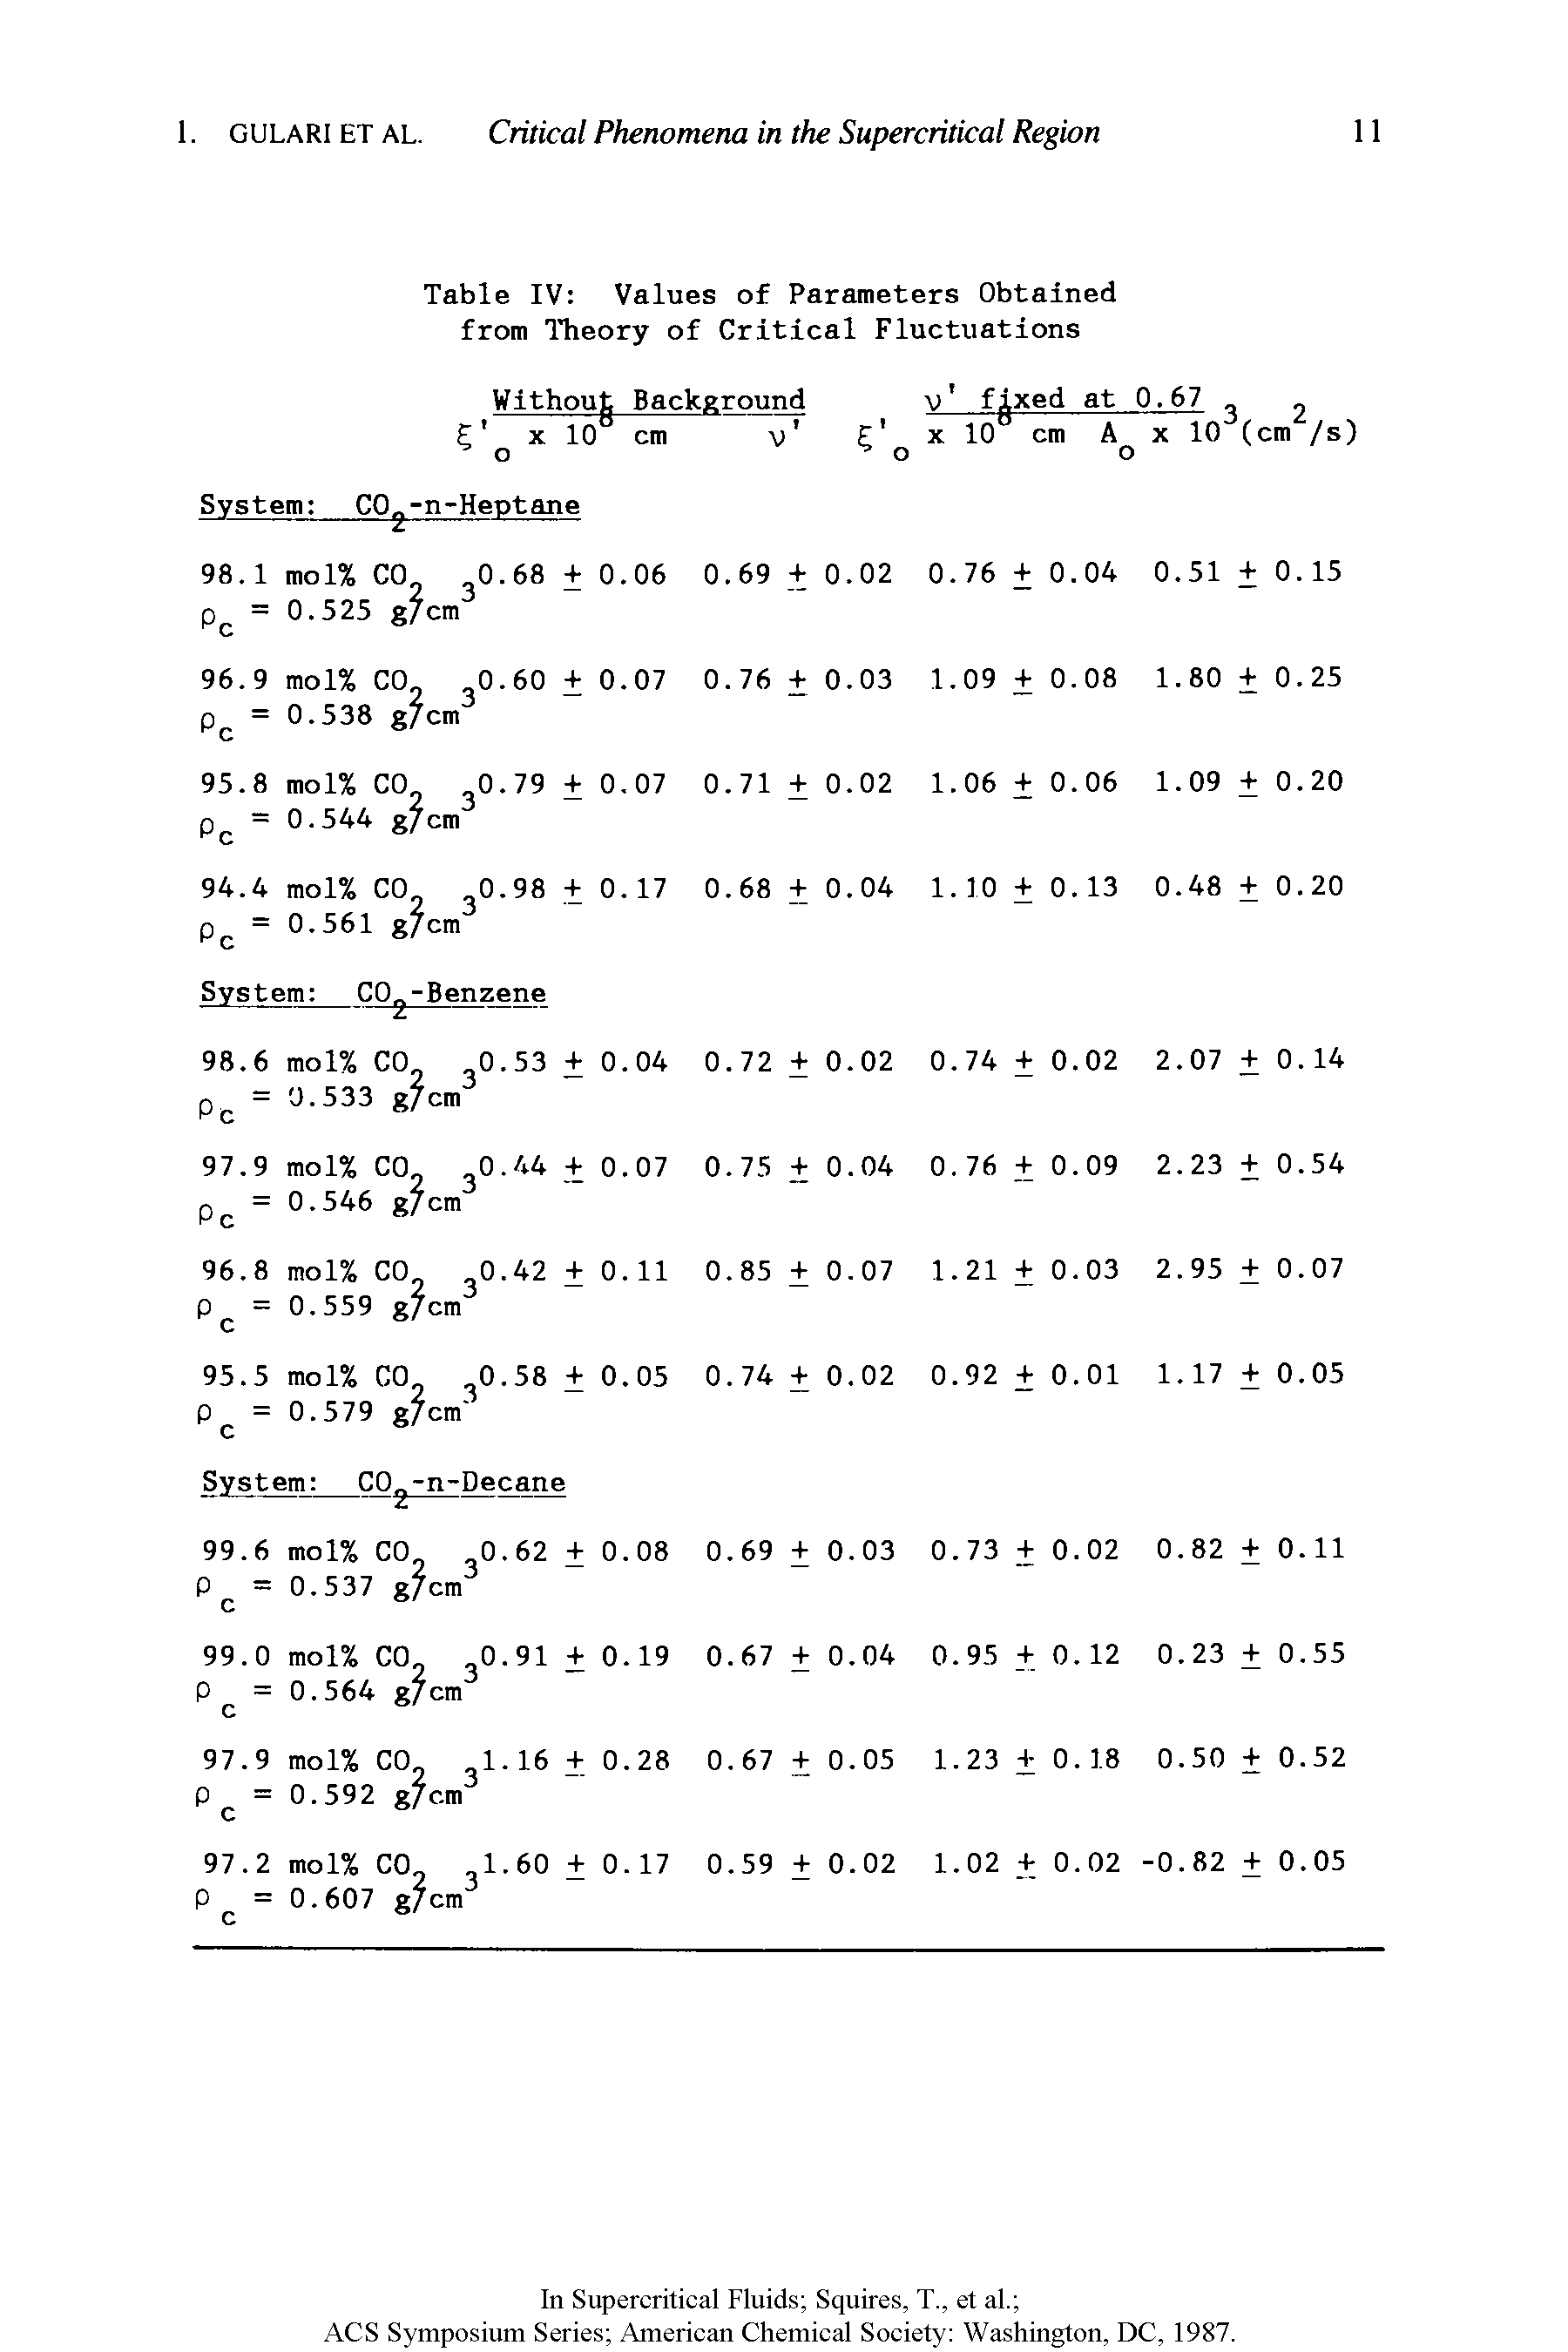 Table IV Values of Parameters Obtained from Theory of Critical Fluctuations...